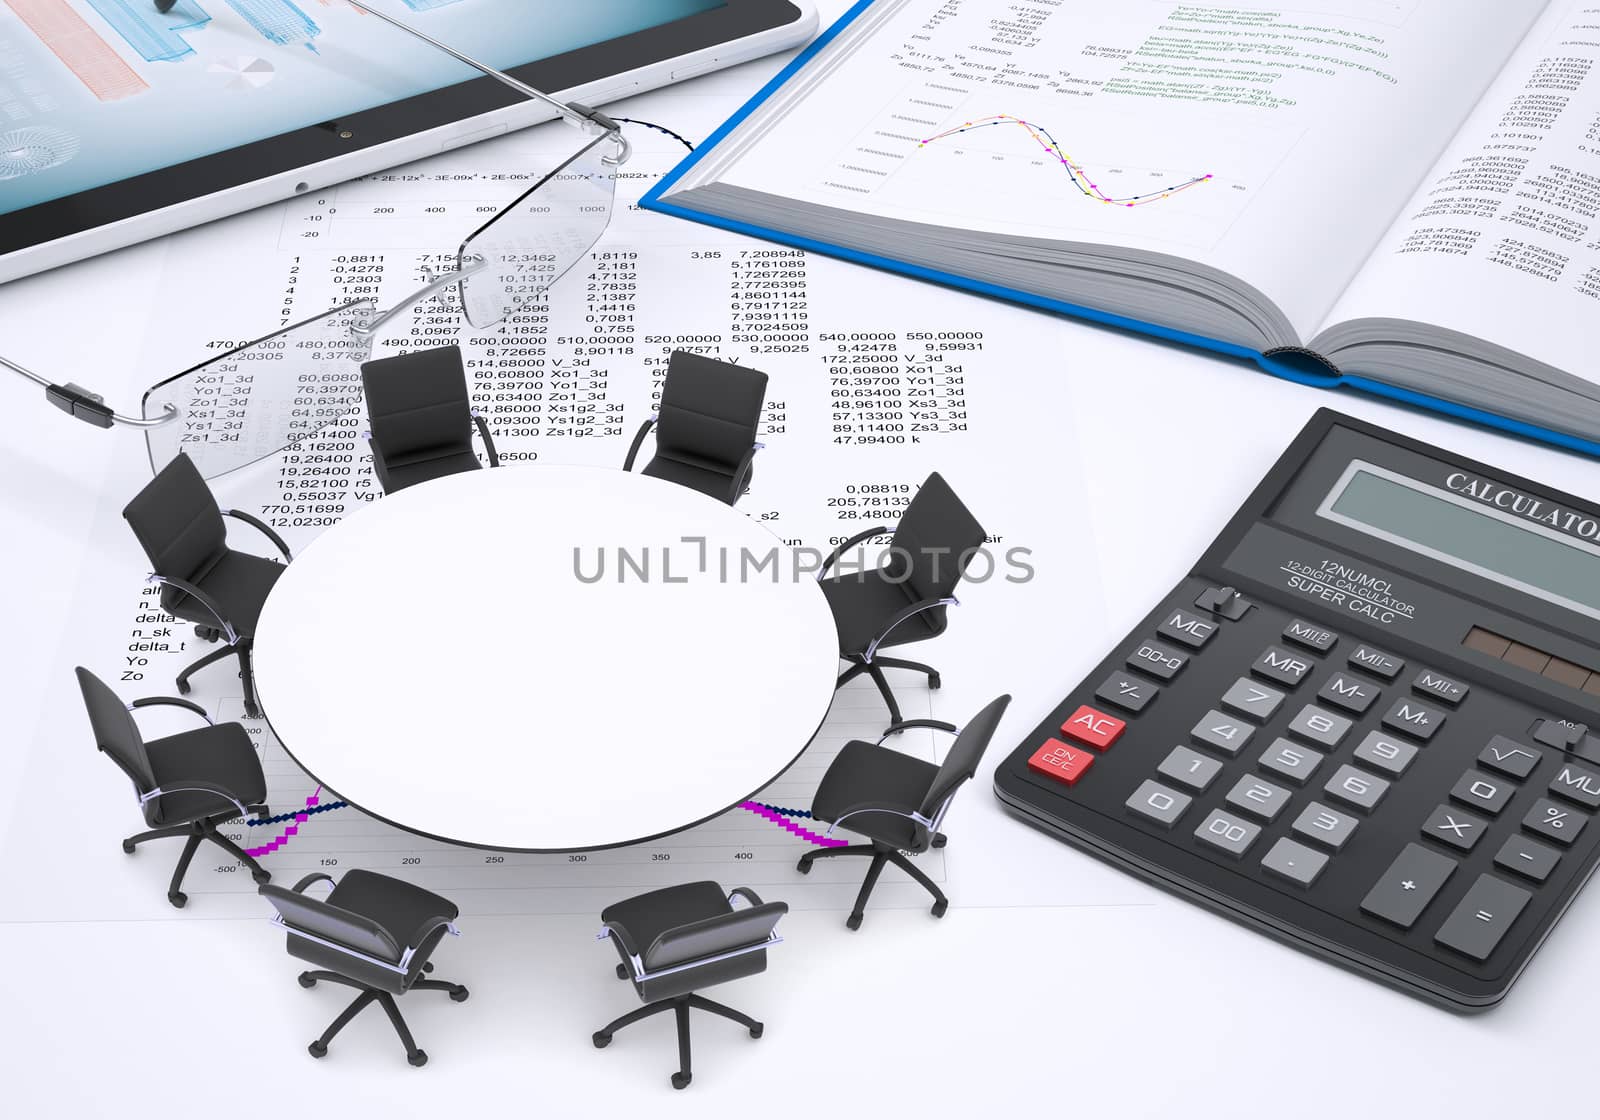 Miniature round table with chairs, tablet pc, book, calculator and glasses, all on paper with columns of figures. Business concept